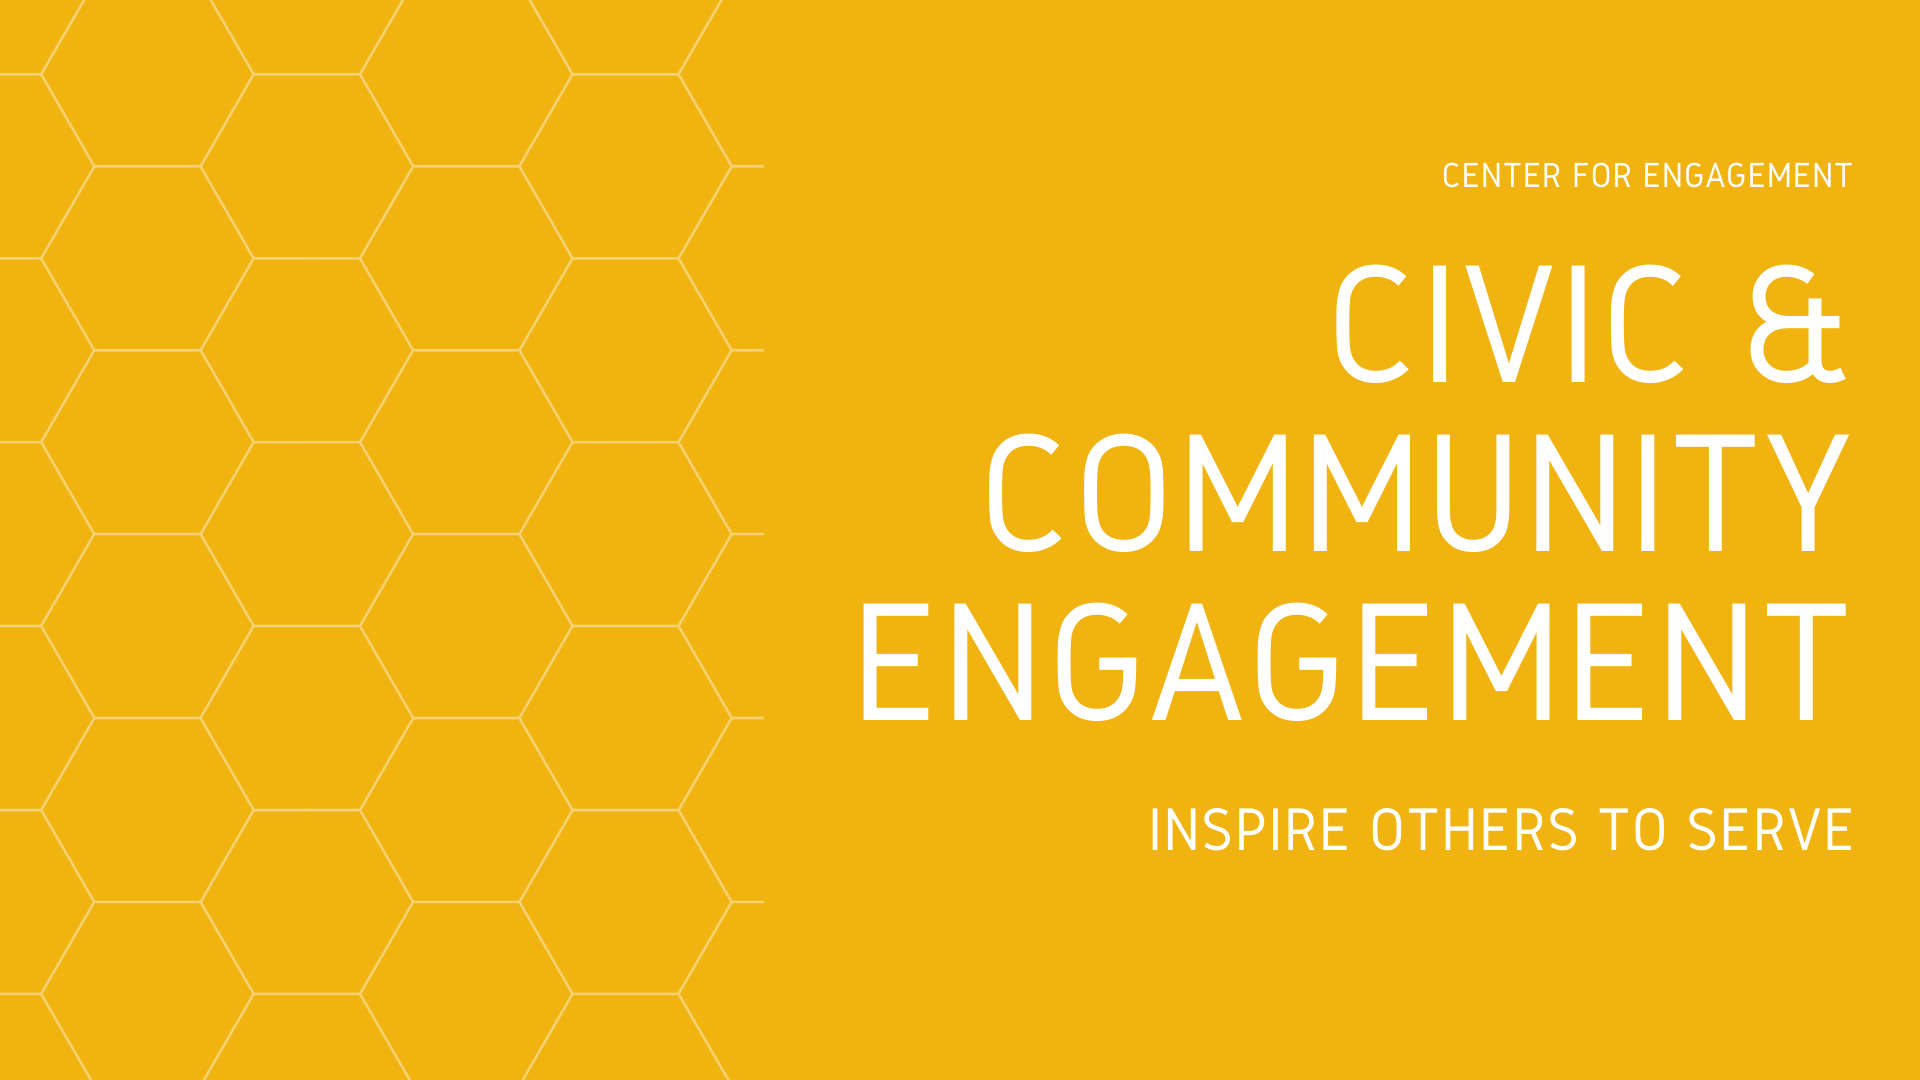 Community and Civic Engagement: Inspire Others to Serve